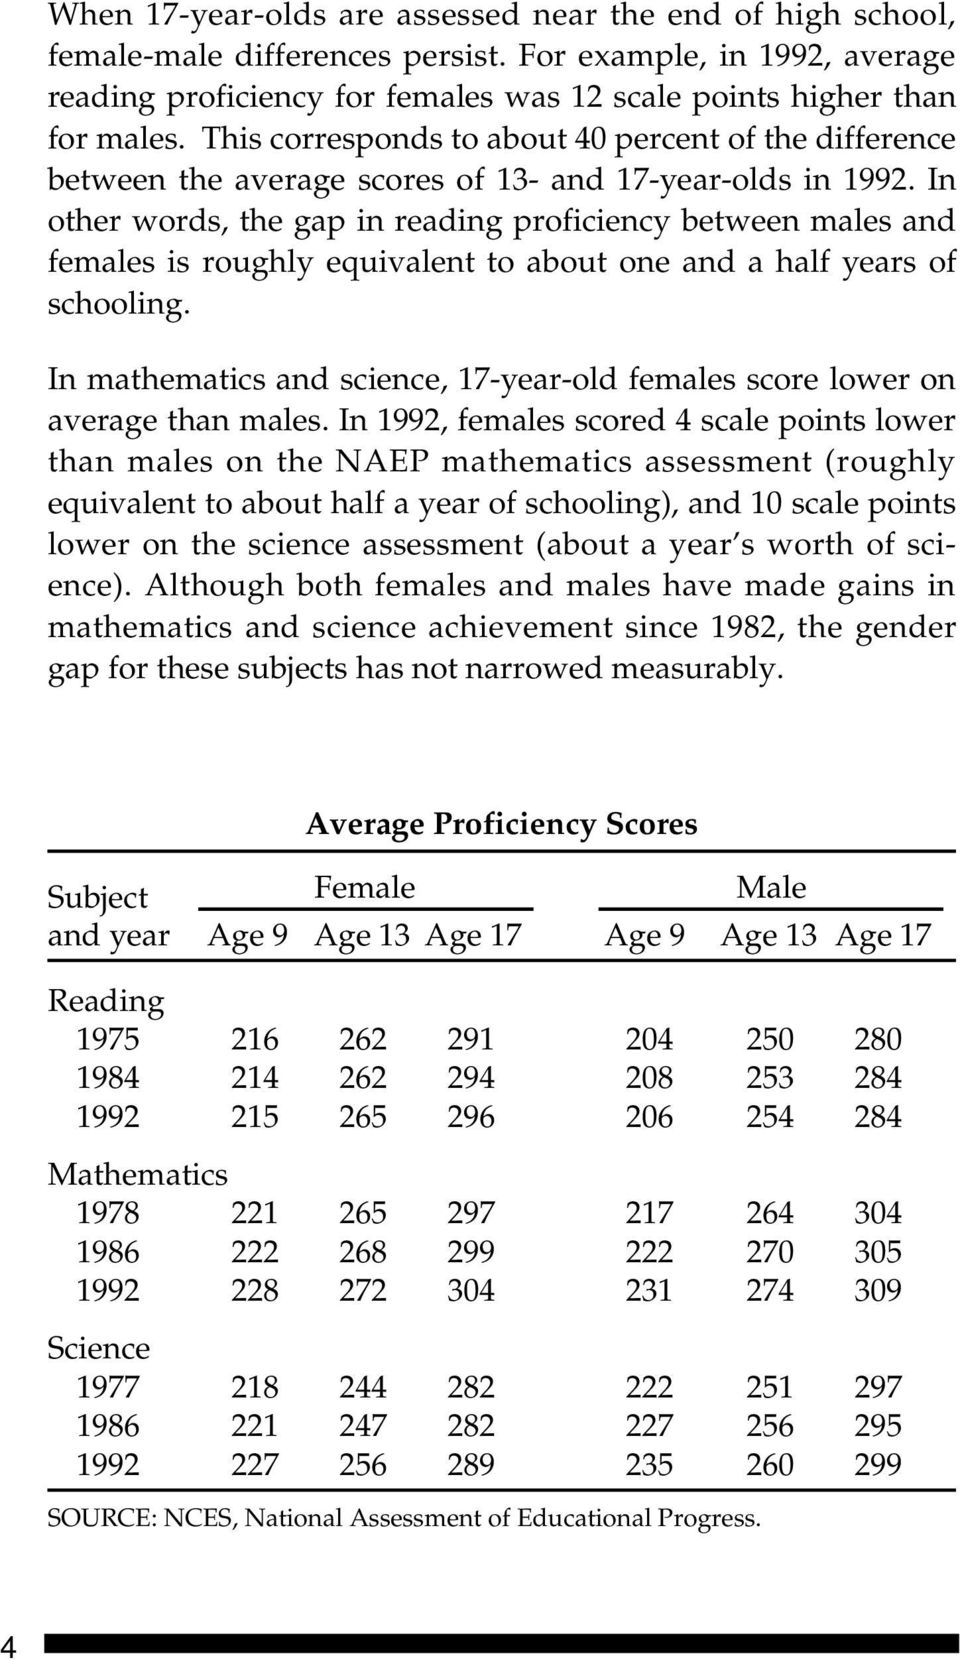 In other words, the gap in reading proficiency between males and females is roughly equivalent to about one and a half years of schooling.